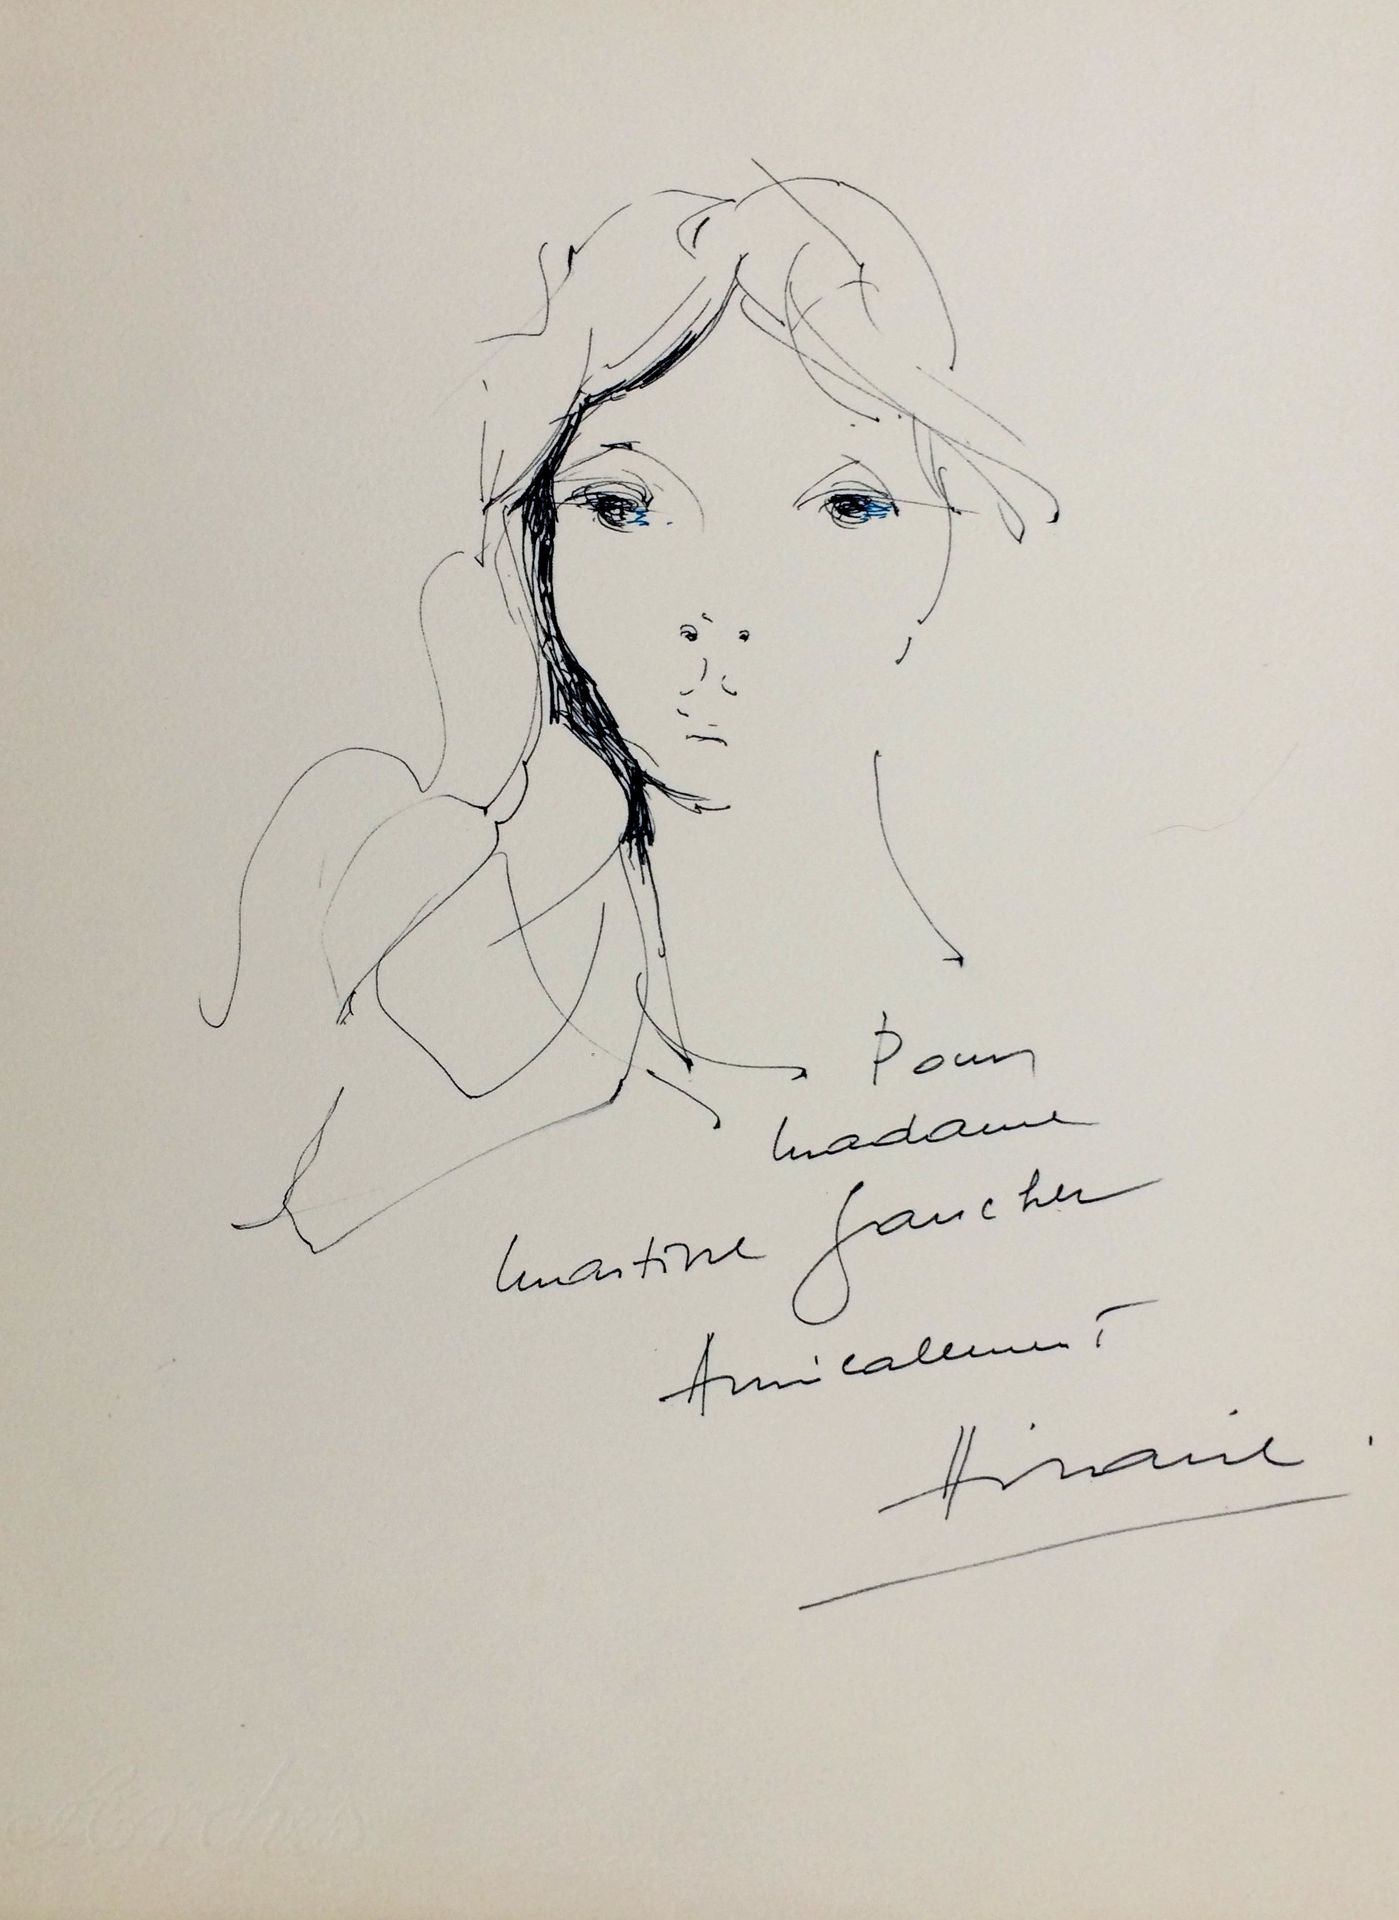 Camille HILAIRE Camille HILAIRE

Portrait

1972

Original drawing in ink signed &hellip;